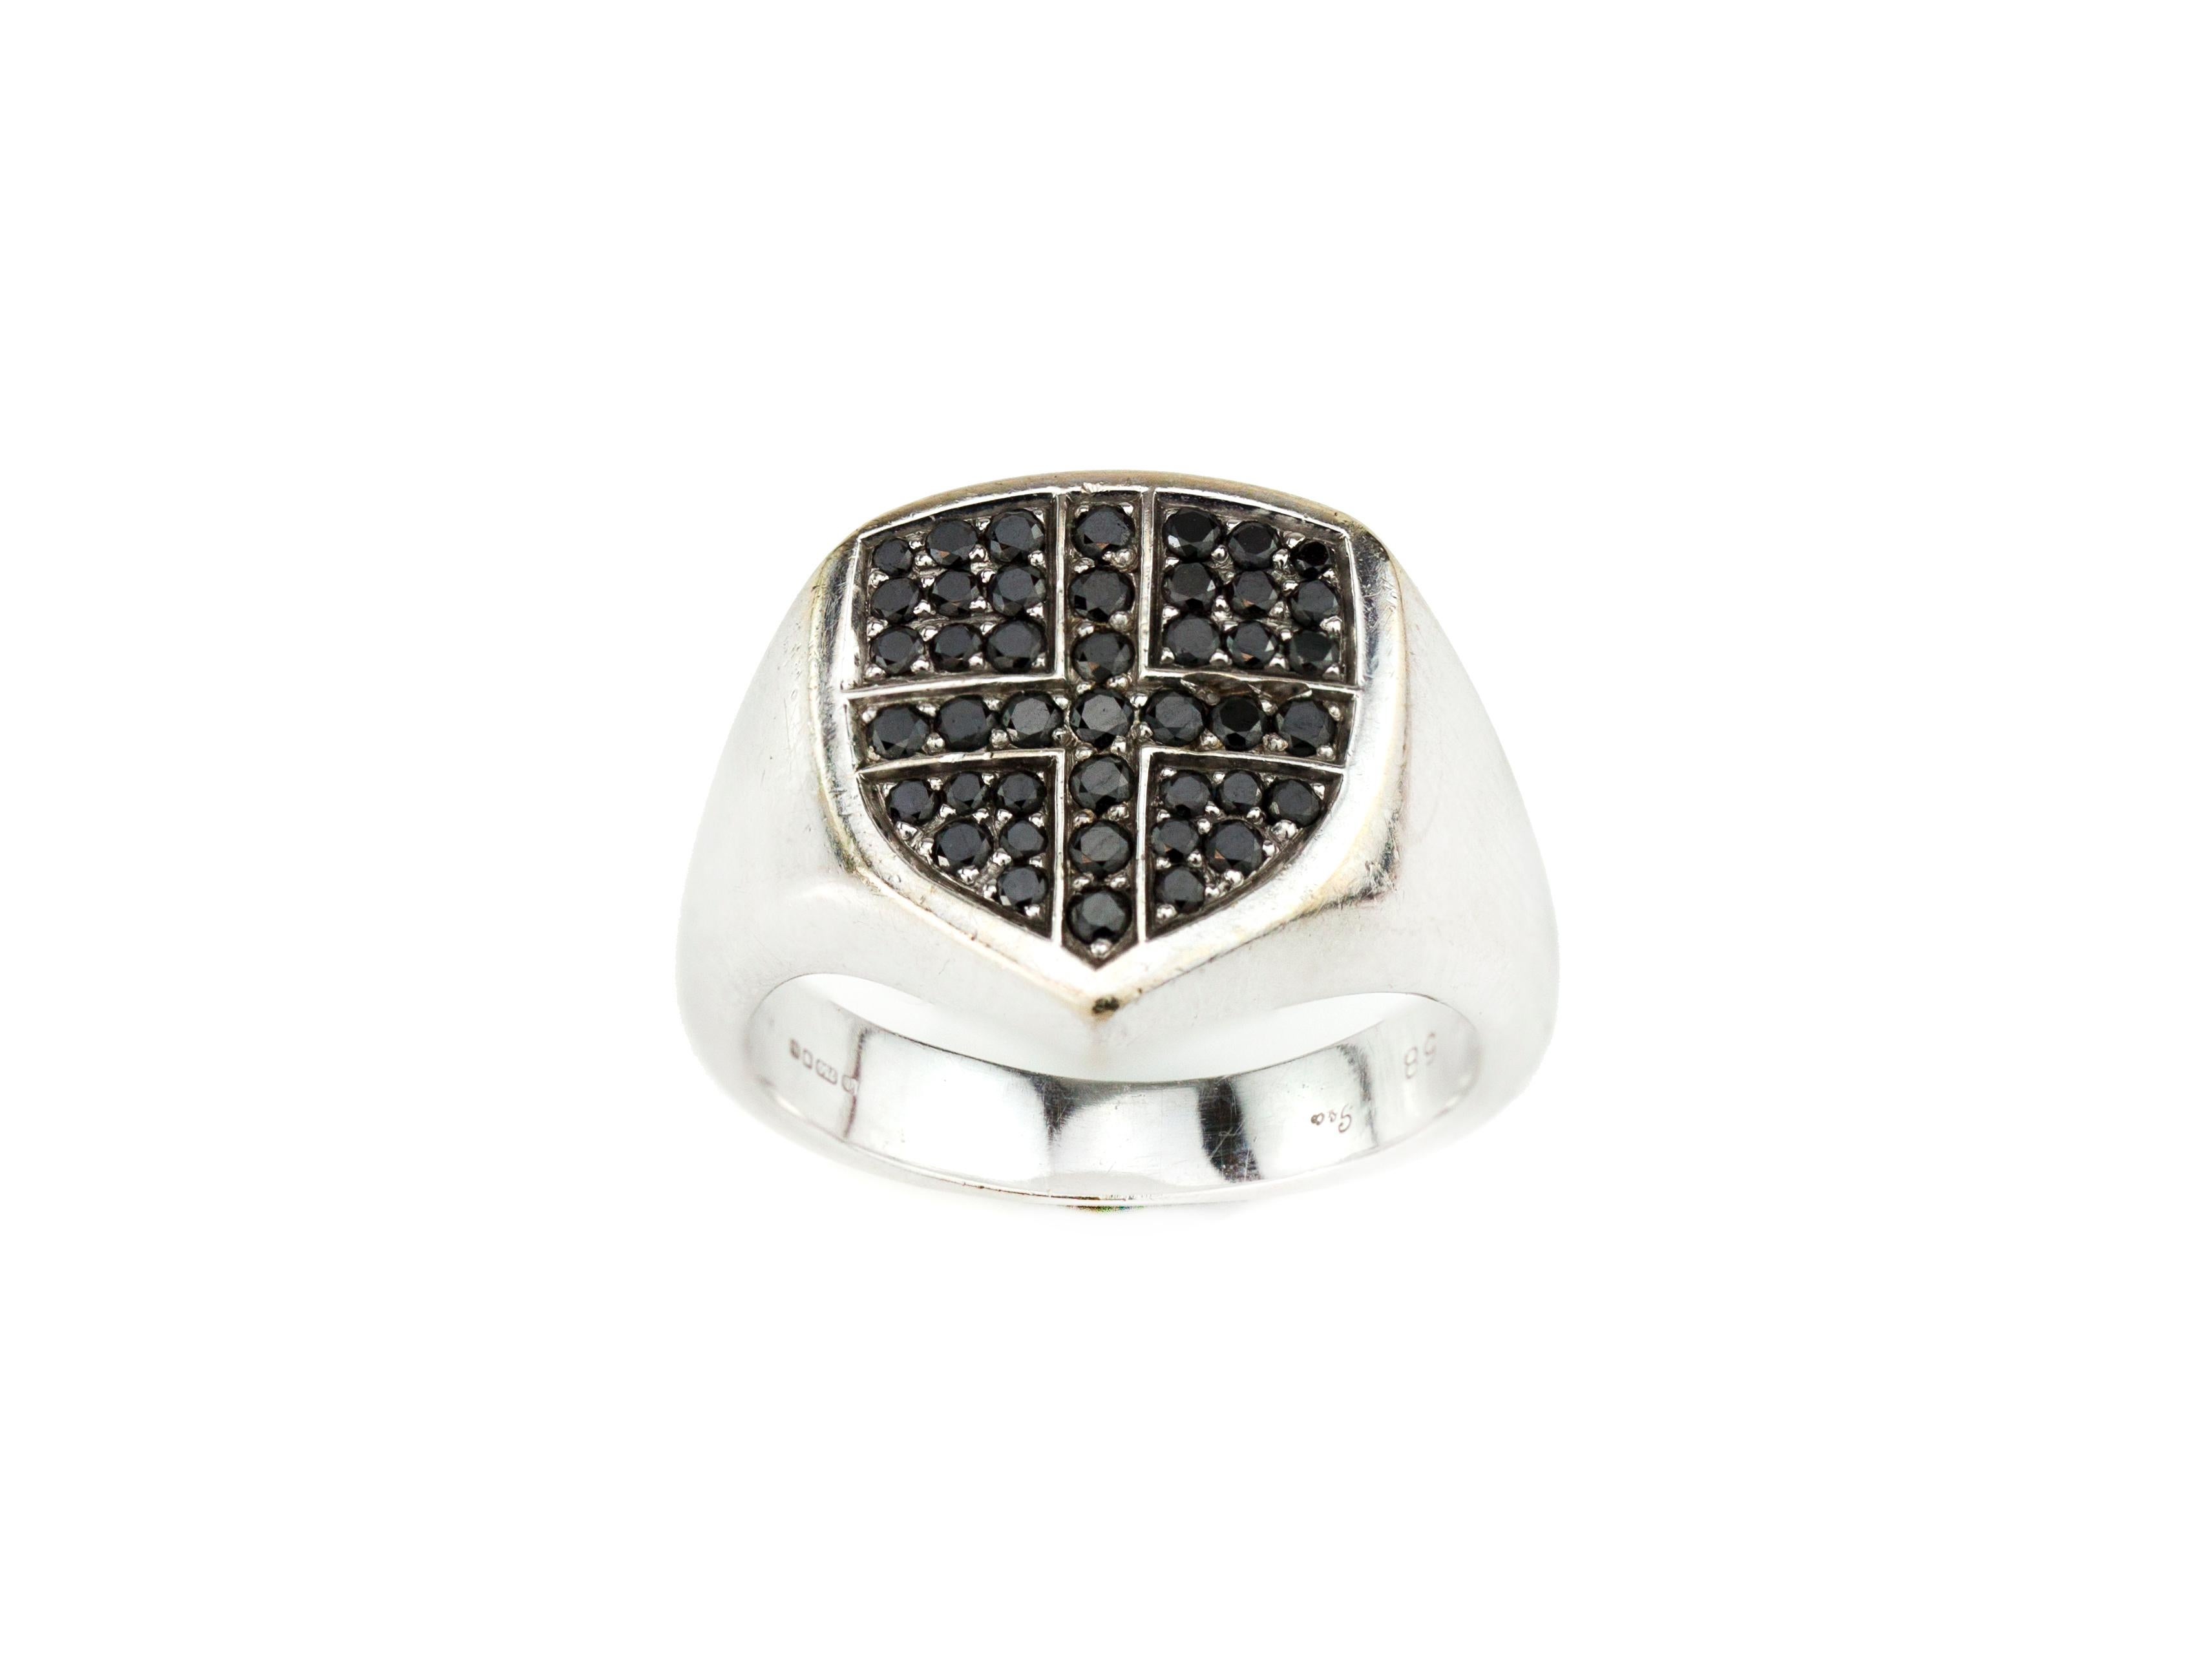 Garrard 18kt white gold men's ring with black diamonds. Ring crest is shaped like a shield and set with black diamonds. Ring has an engraving on behind 